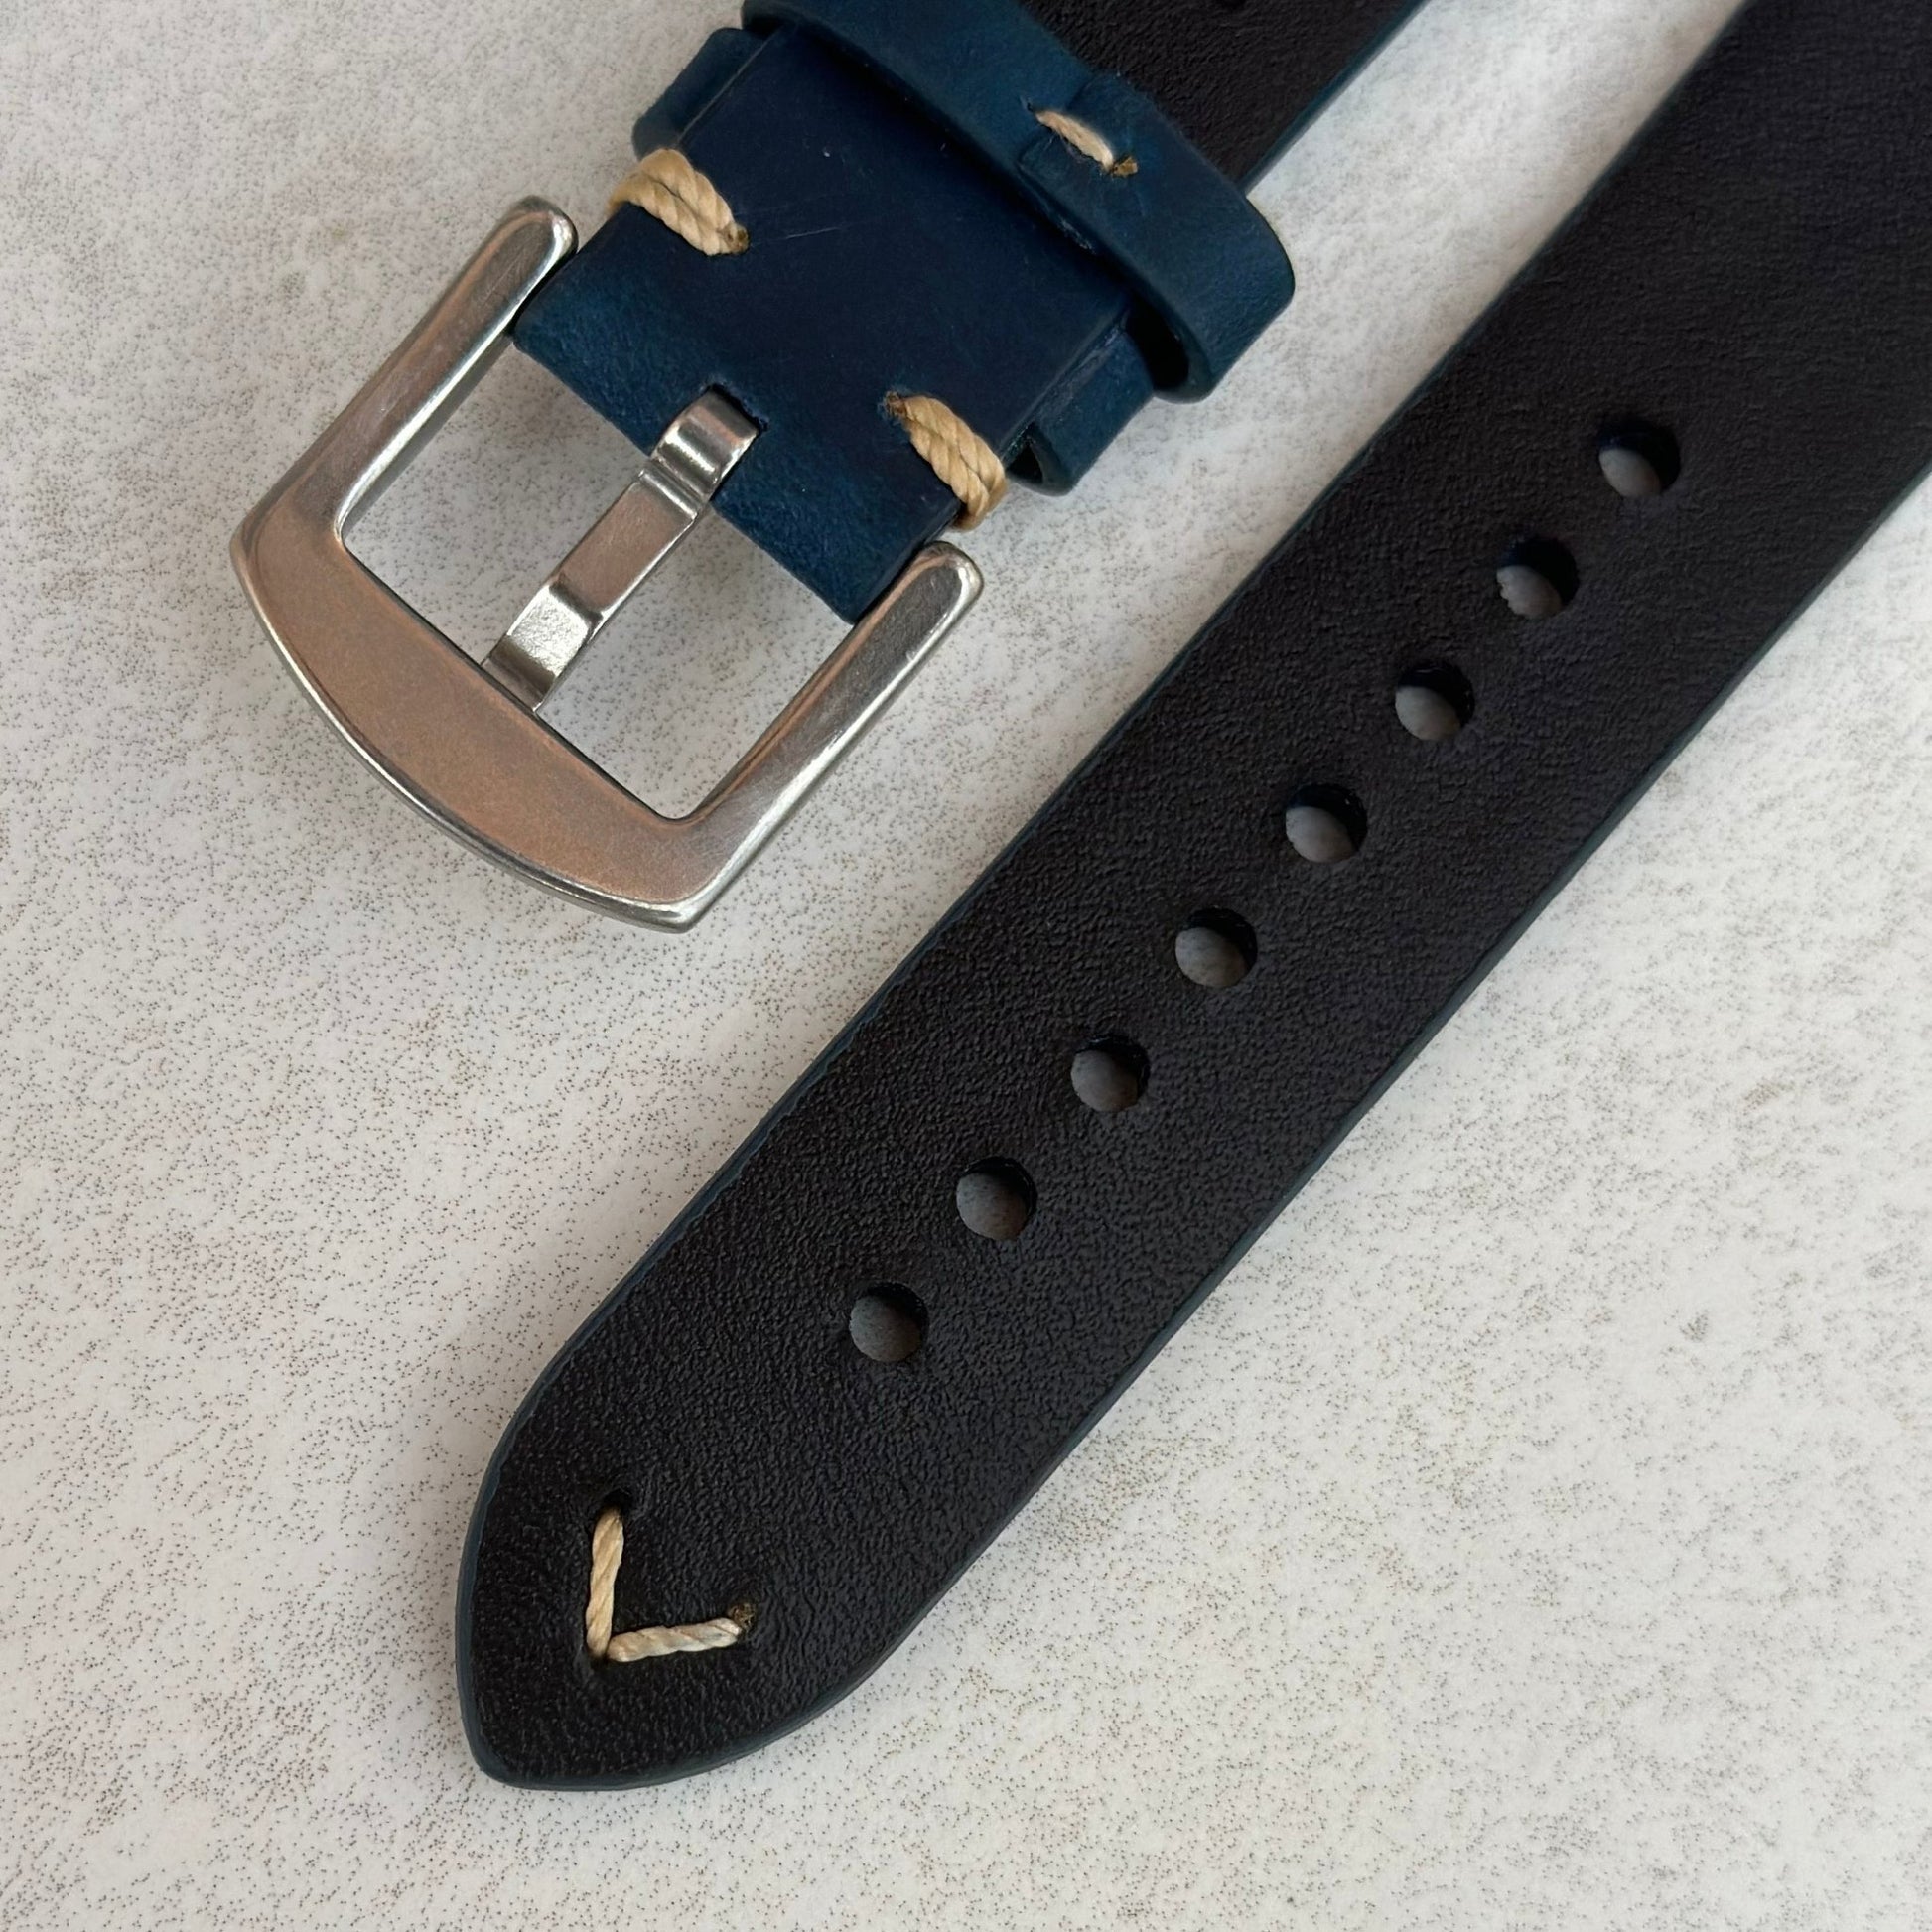 Rear of the buckle on the Madrid blue full grain leather watch strap. 316L stainless steel buckle.